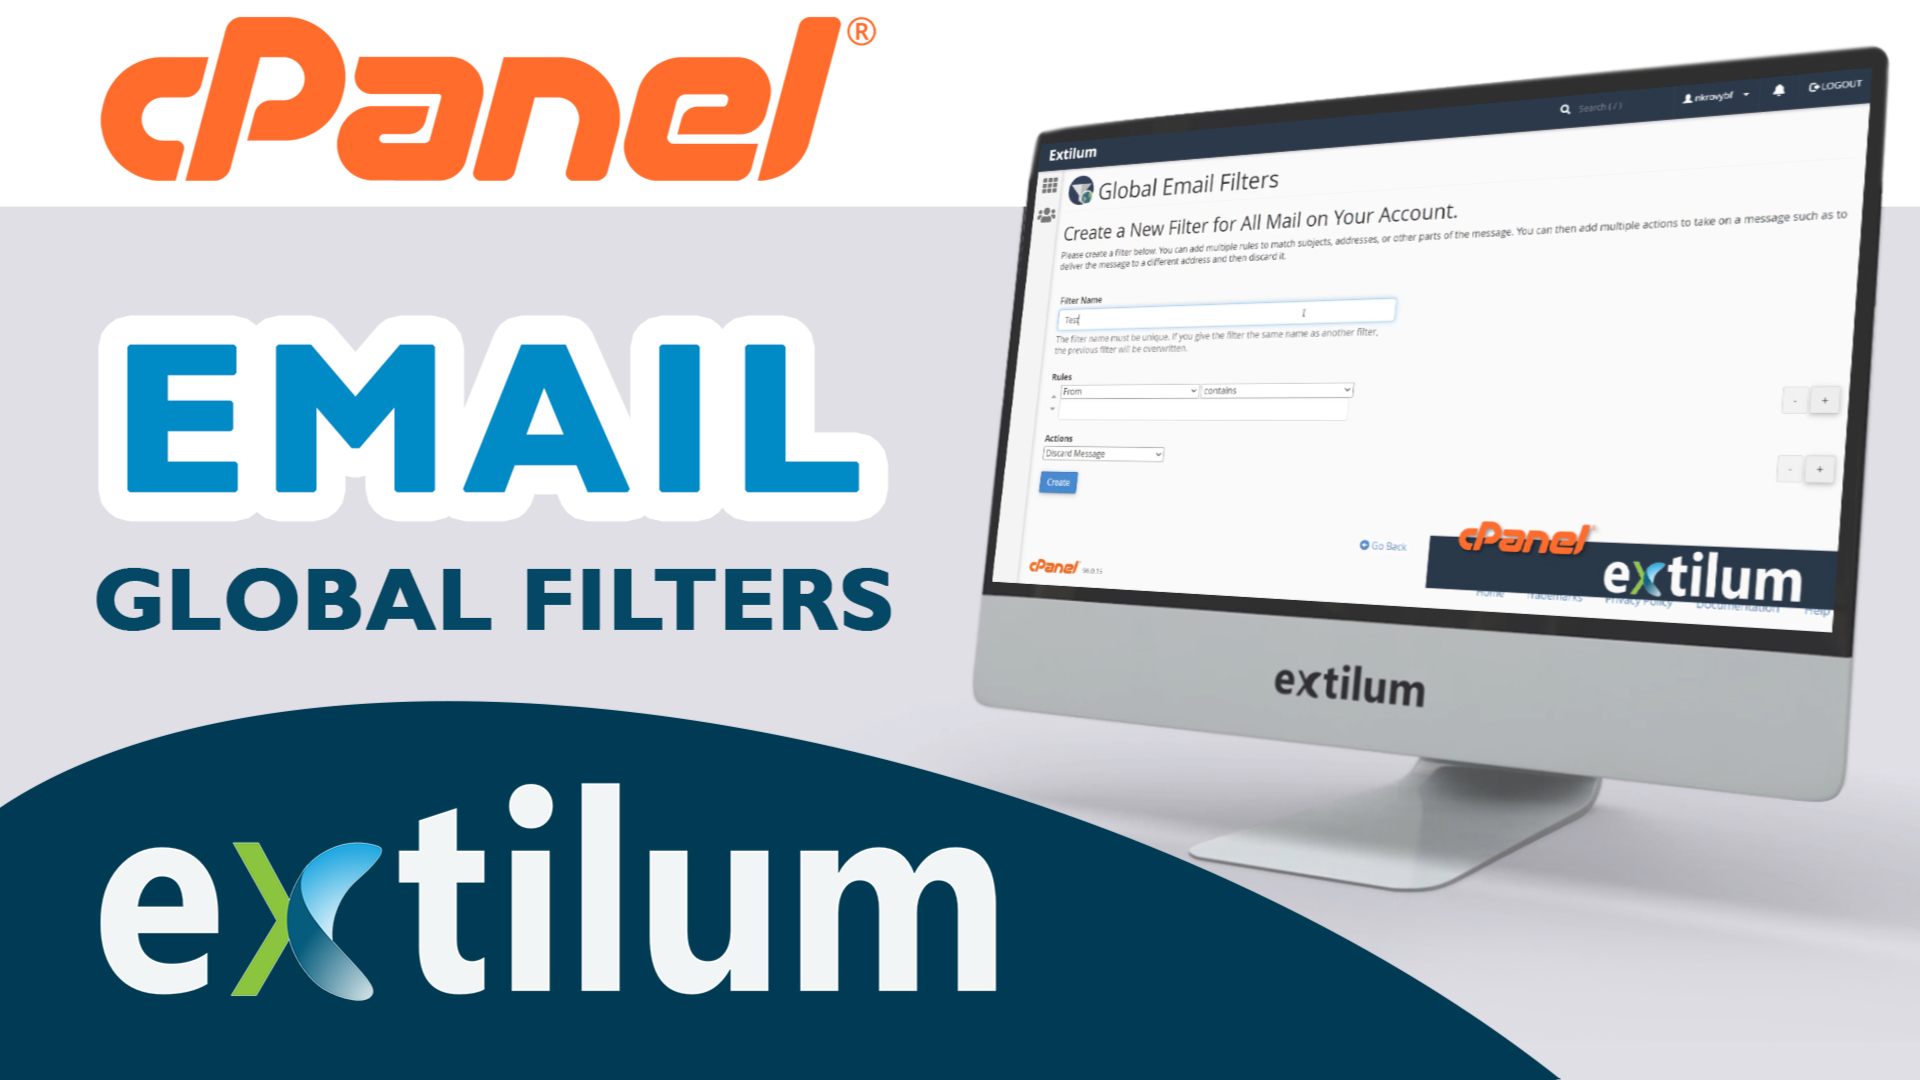 Extilum cPanel - Email global filters